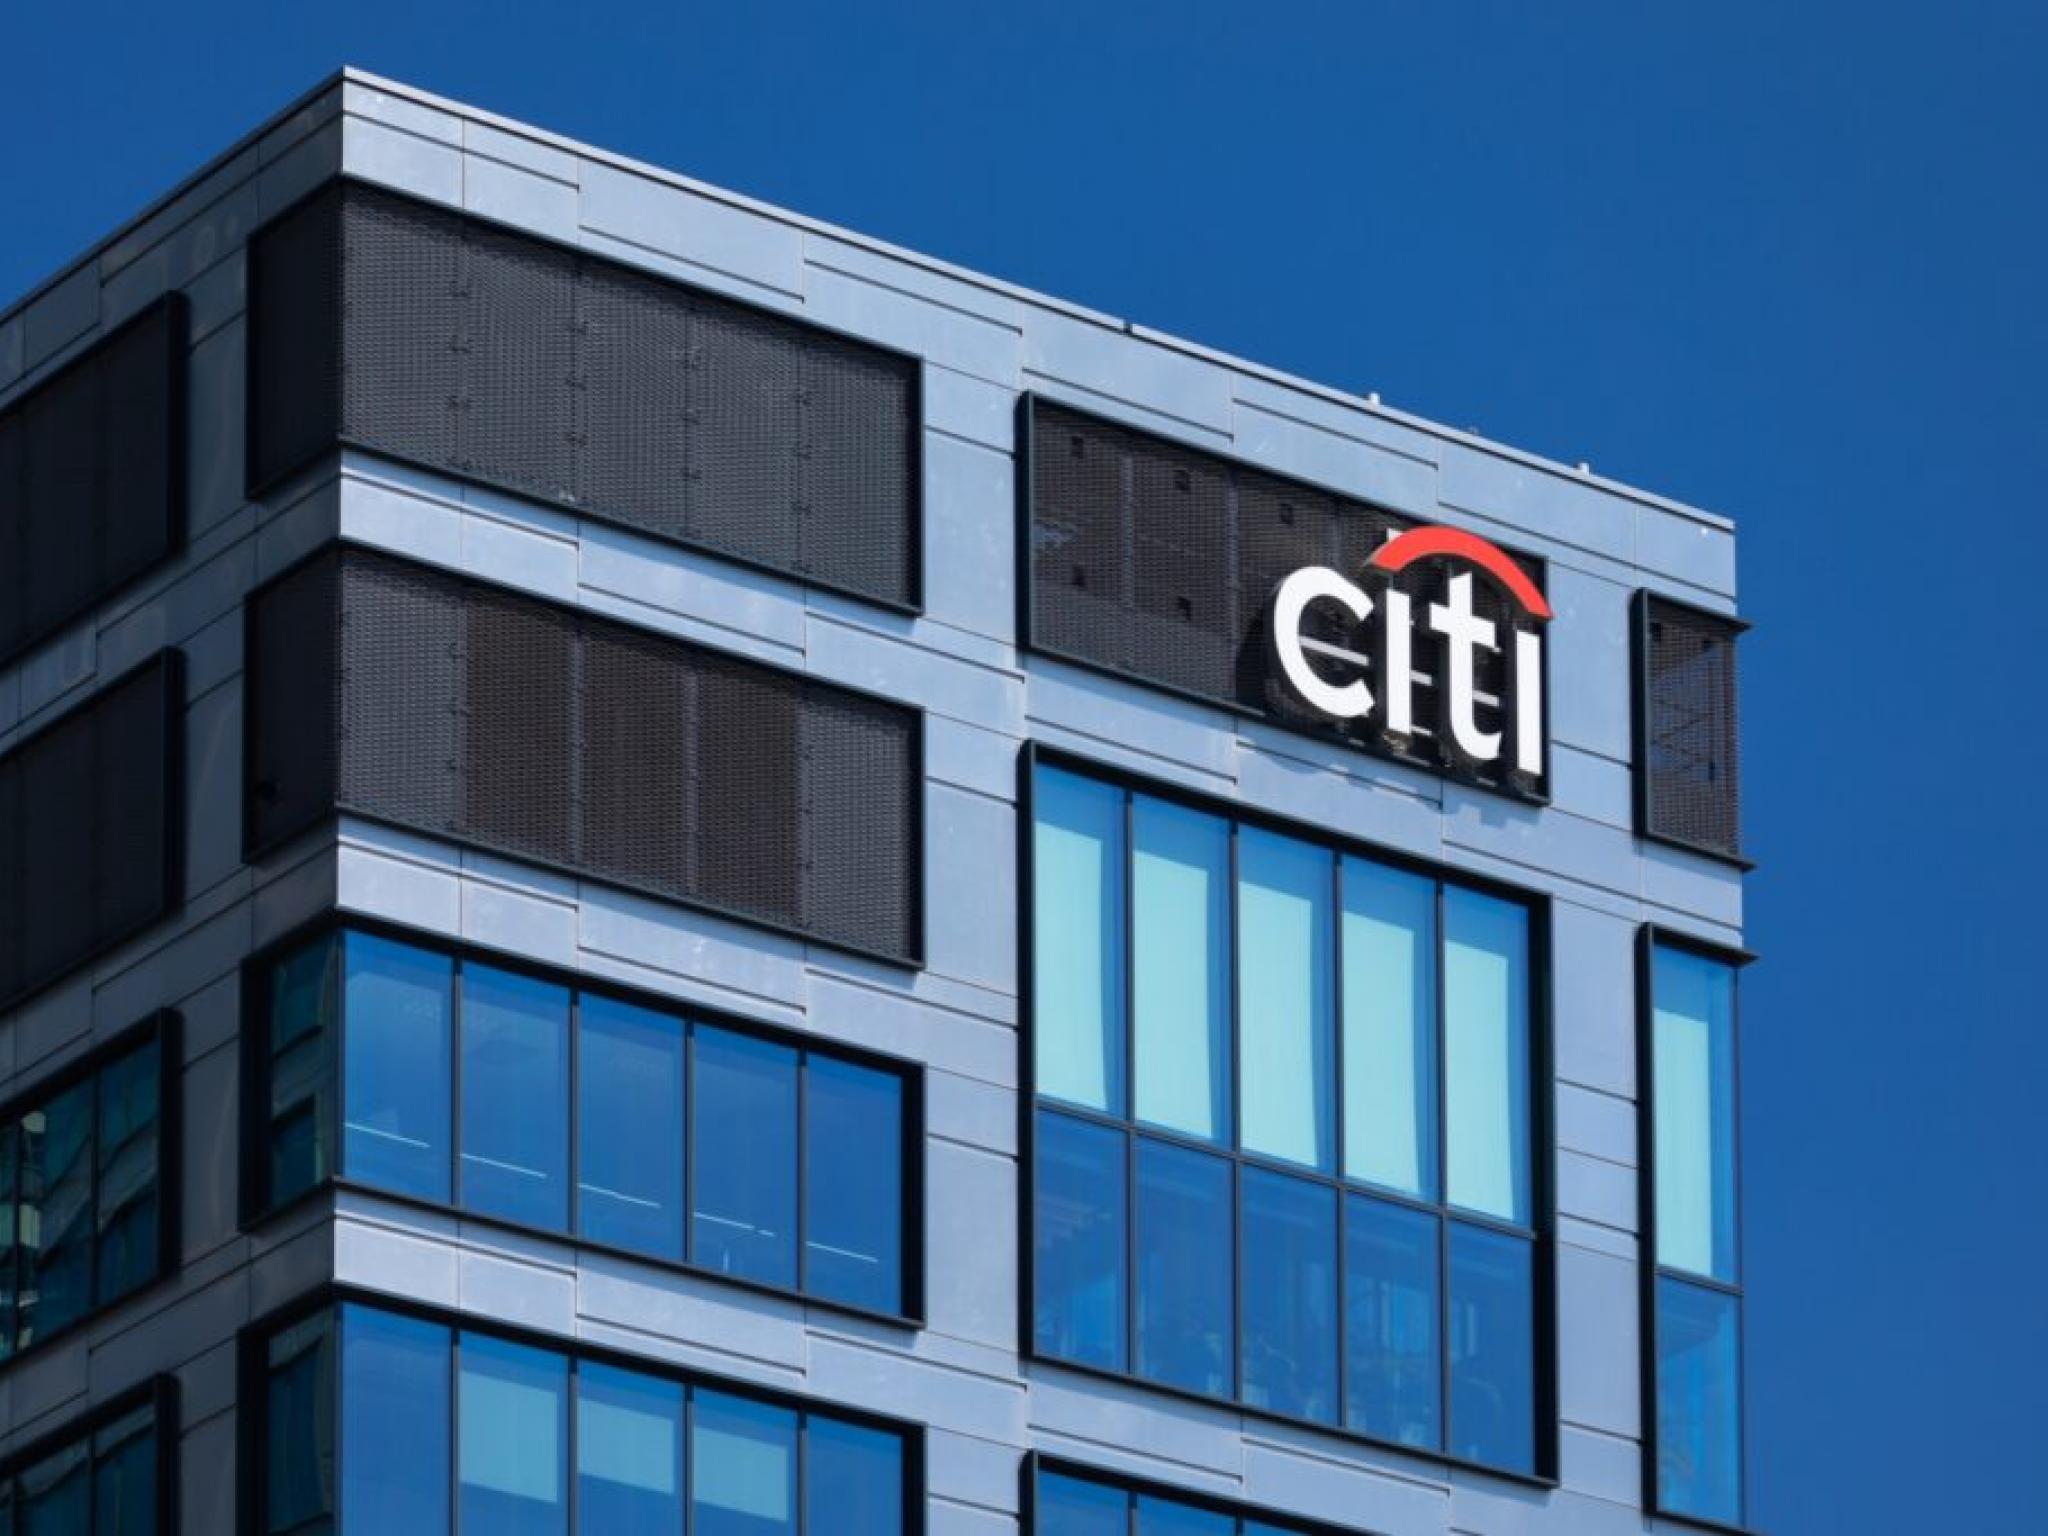  drug-traffickers-exploited-citigroup-atms-for-money-laundering-report 